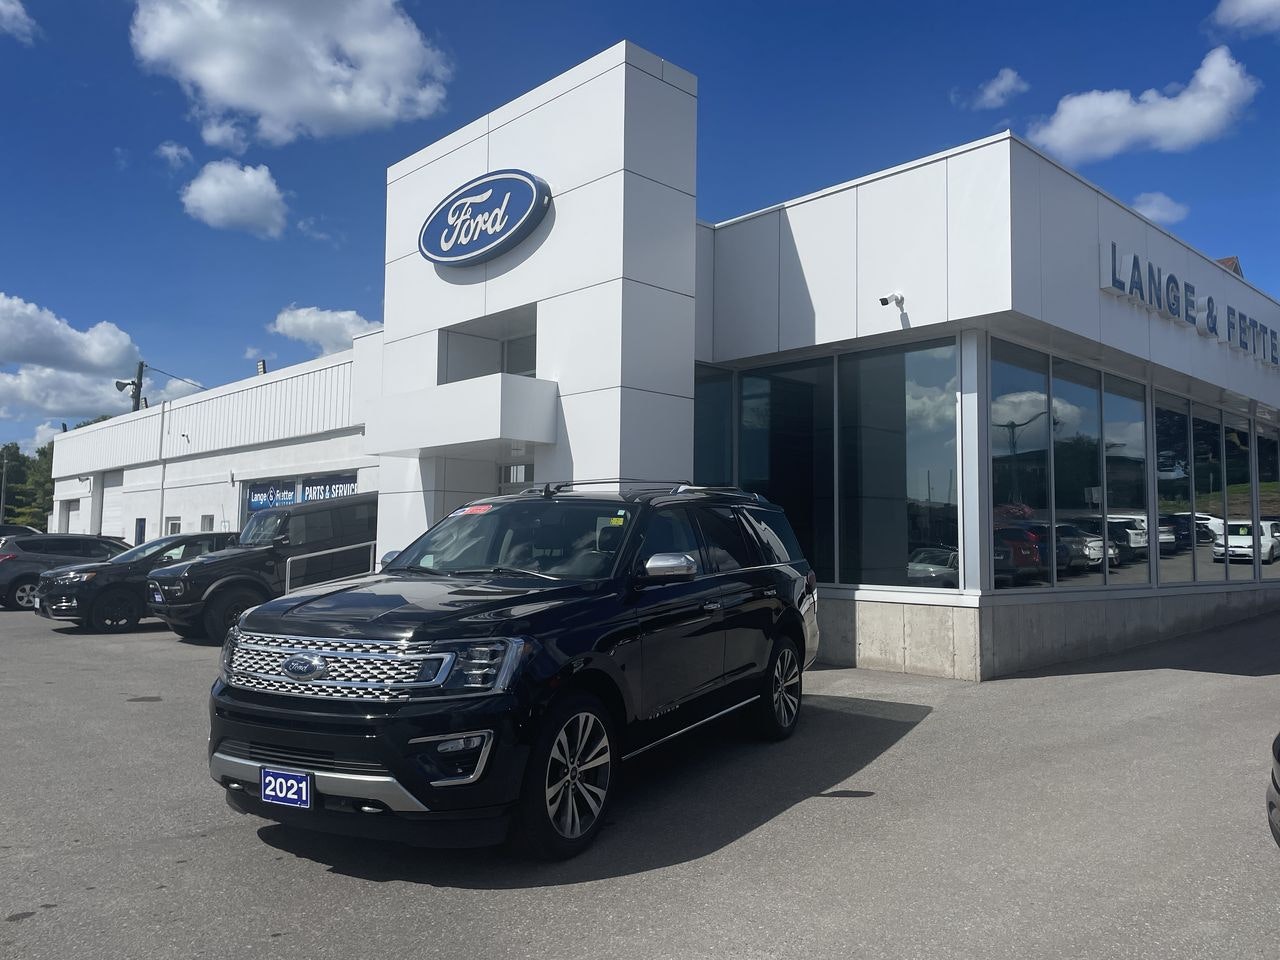 2021 Ford Expedition - P21237 Full Image 1